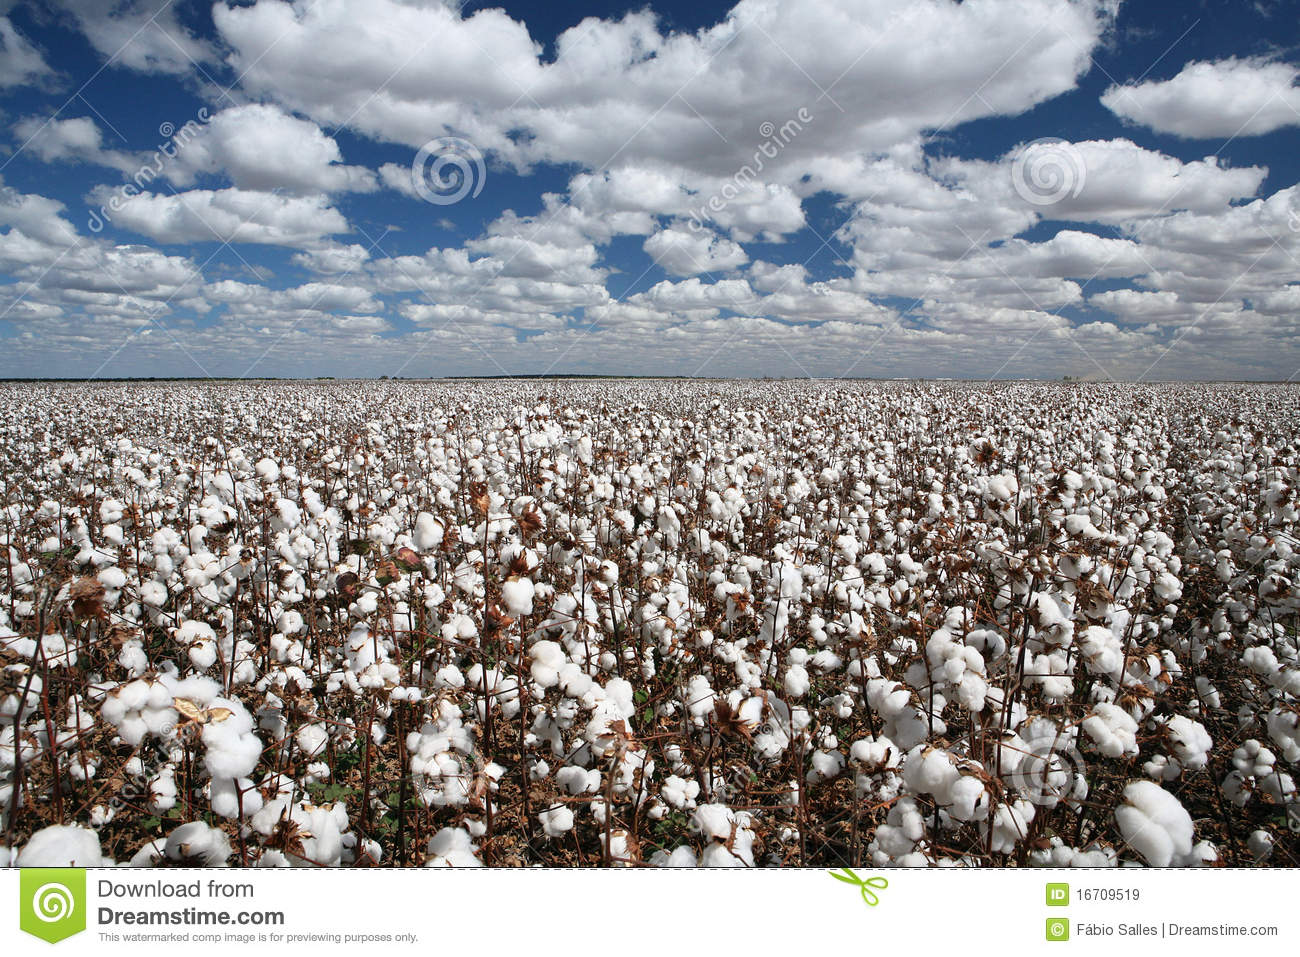 Cotton Plantation In Contrast With Blue Sky And Clouds 